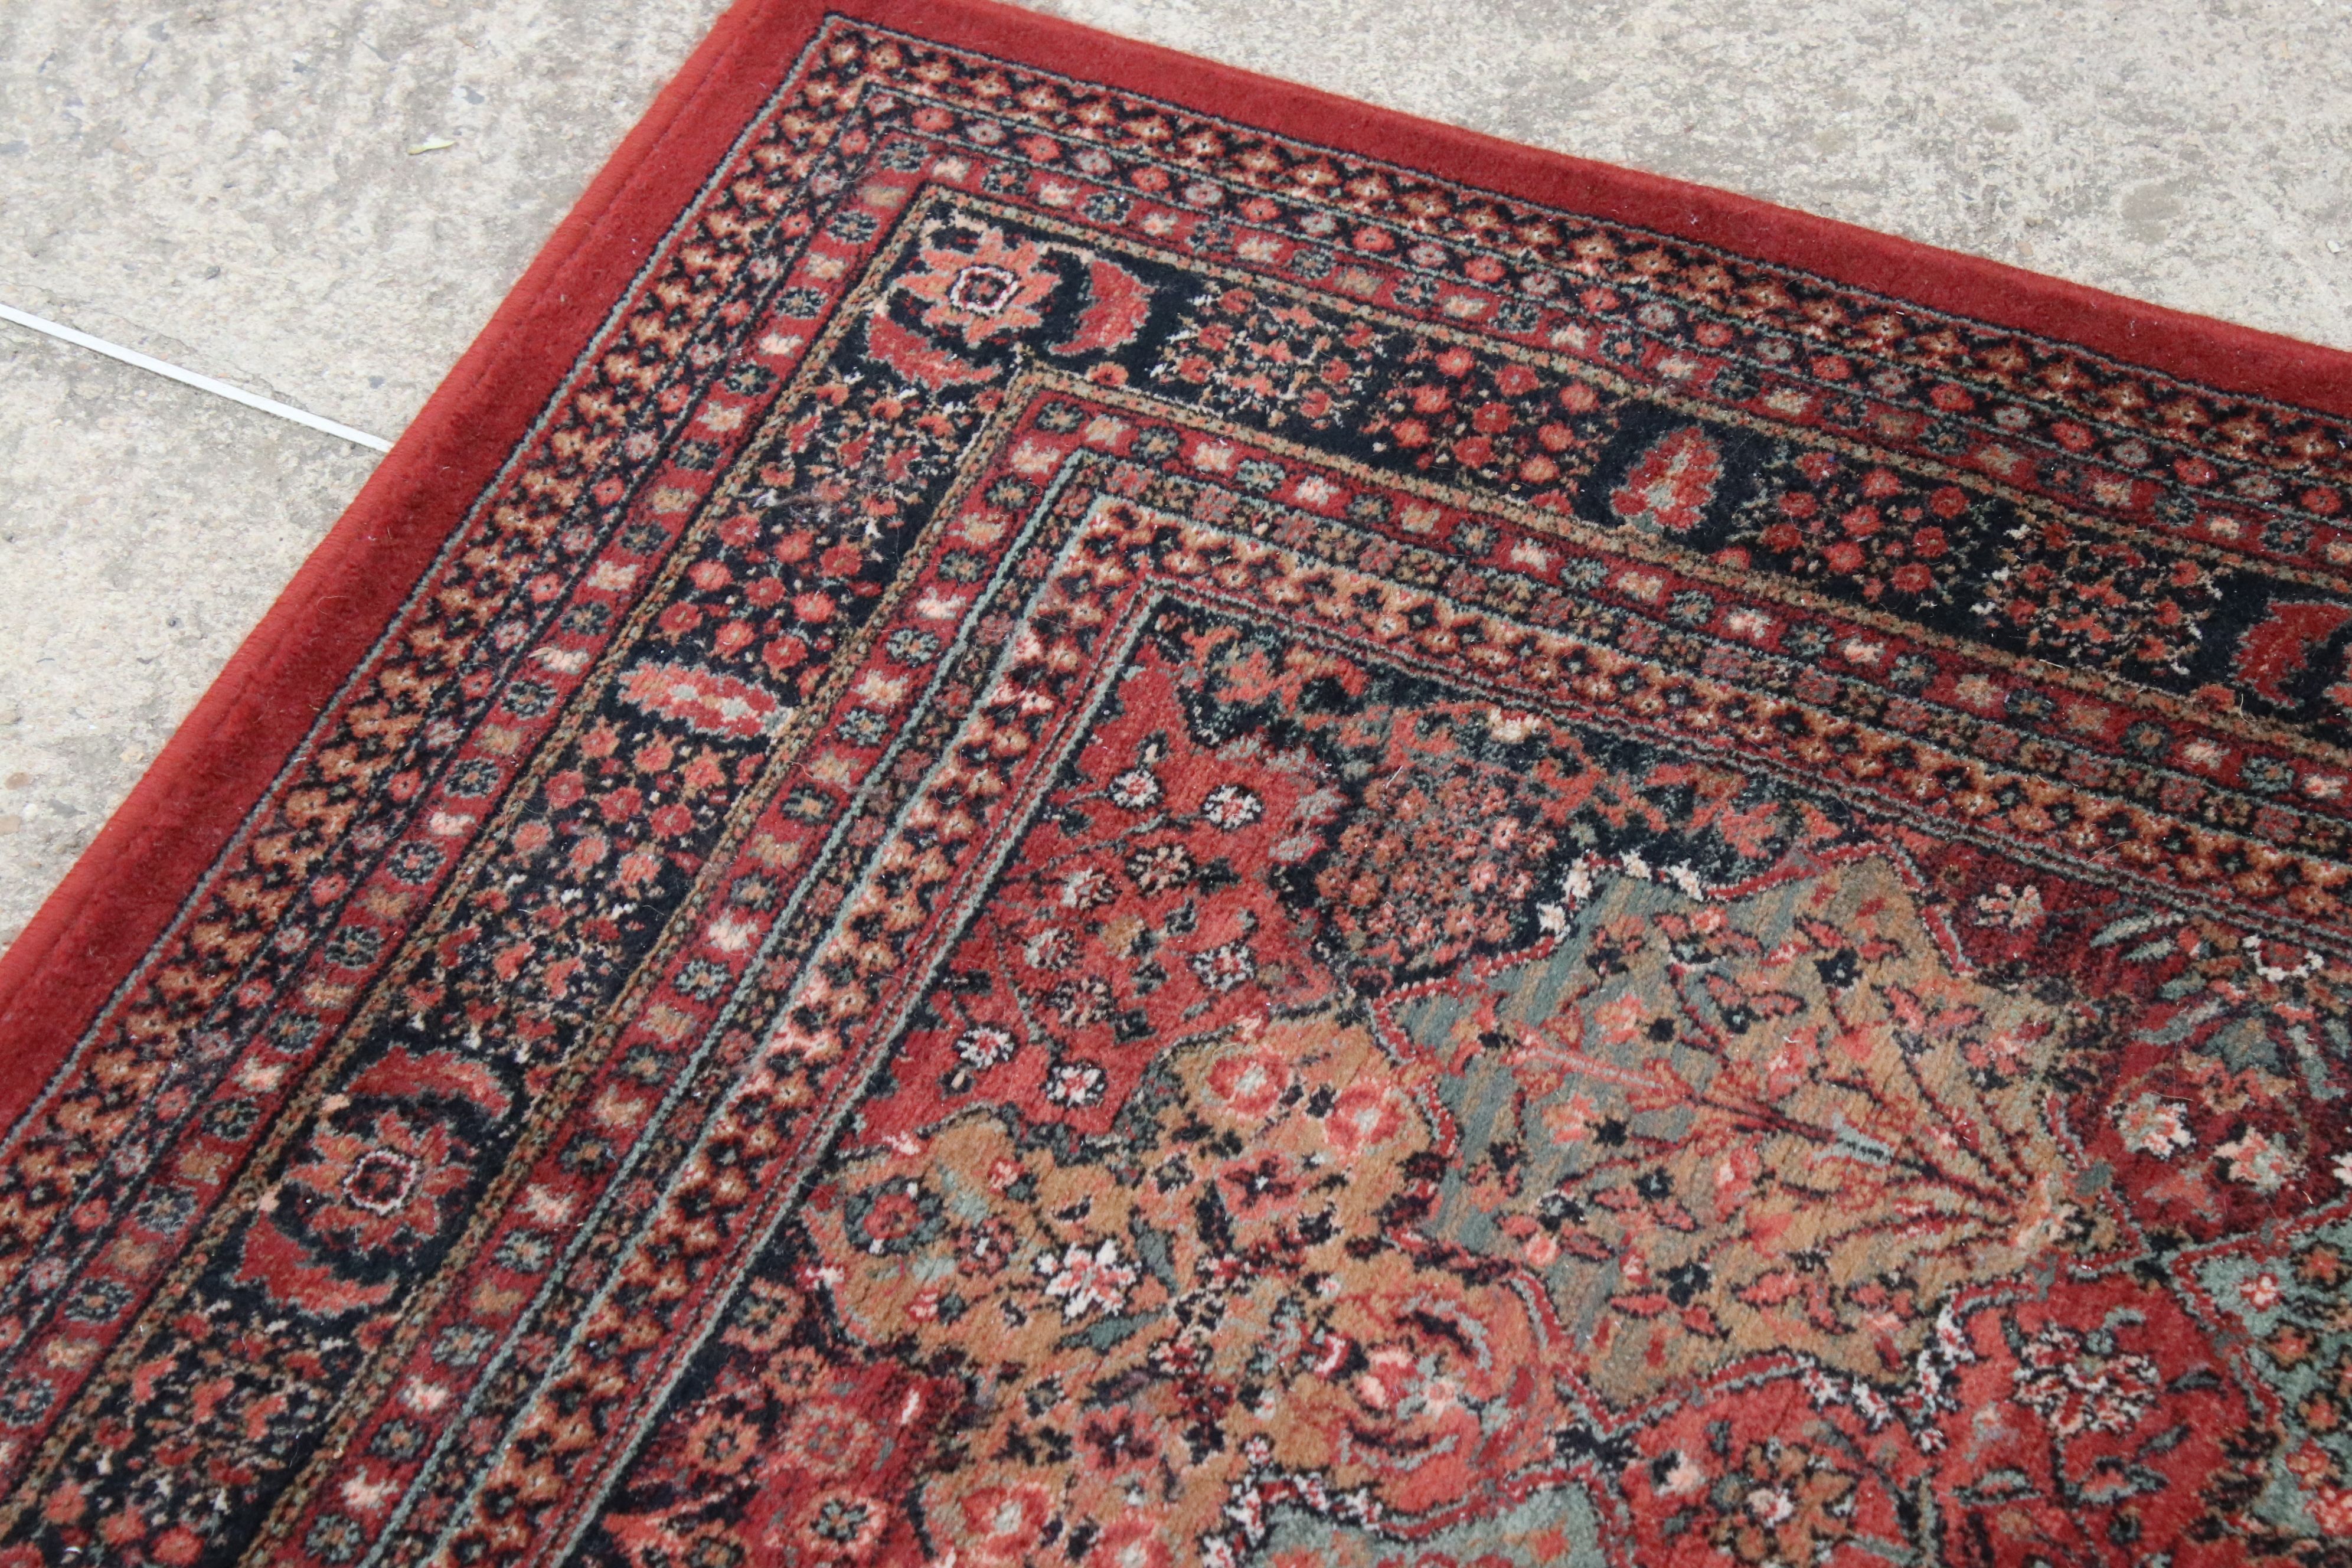 Red Ground Rug retailed by John Lewis, 240cm x 160cm - Image 3 of 4